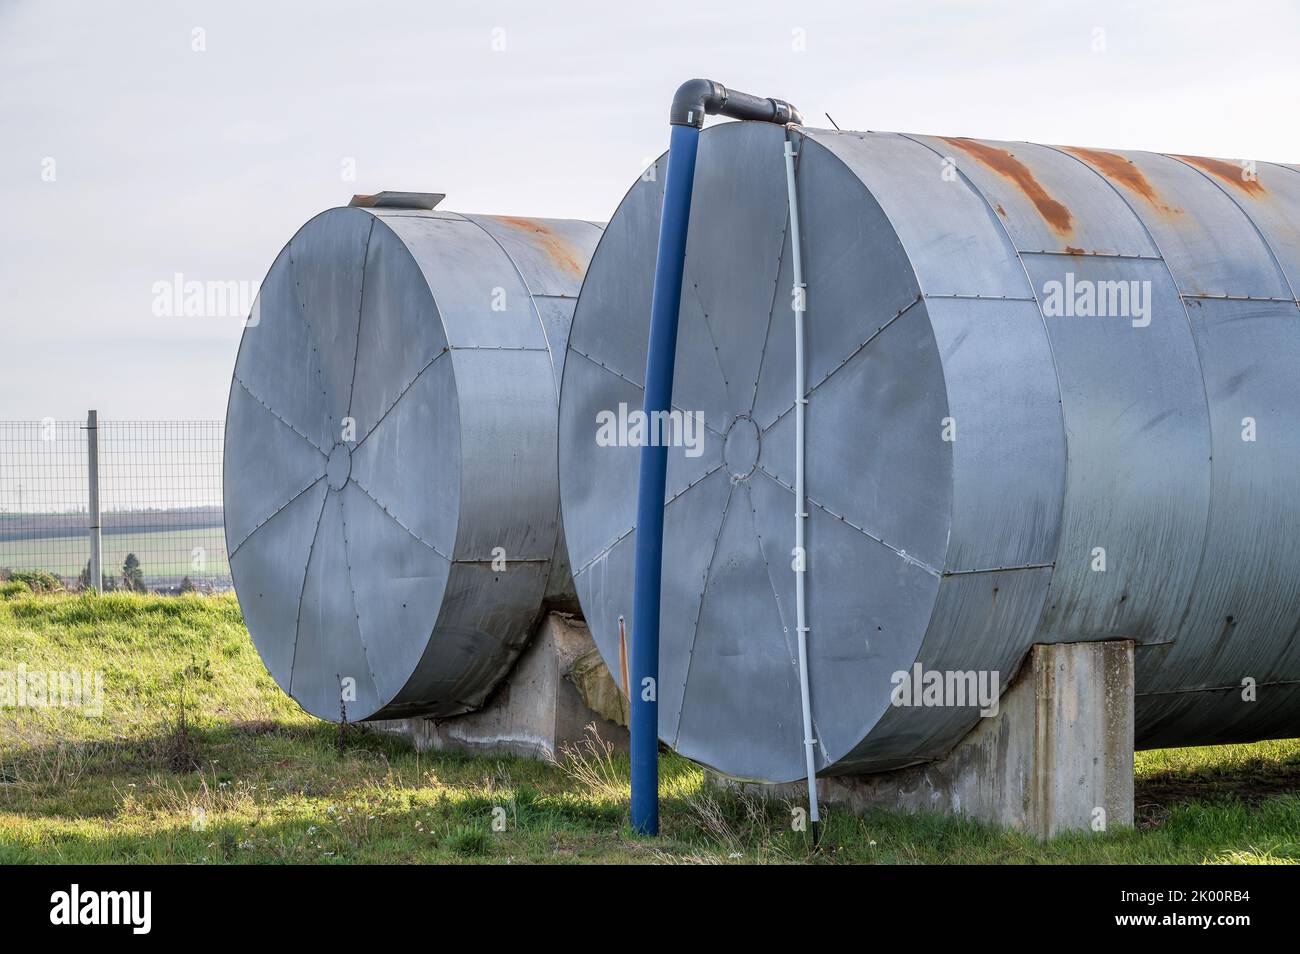 Two large water tanks as part of an orchard irrigation system Stock Photo